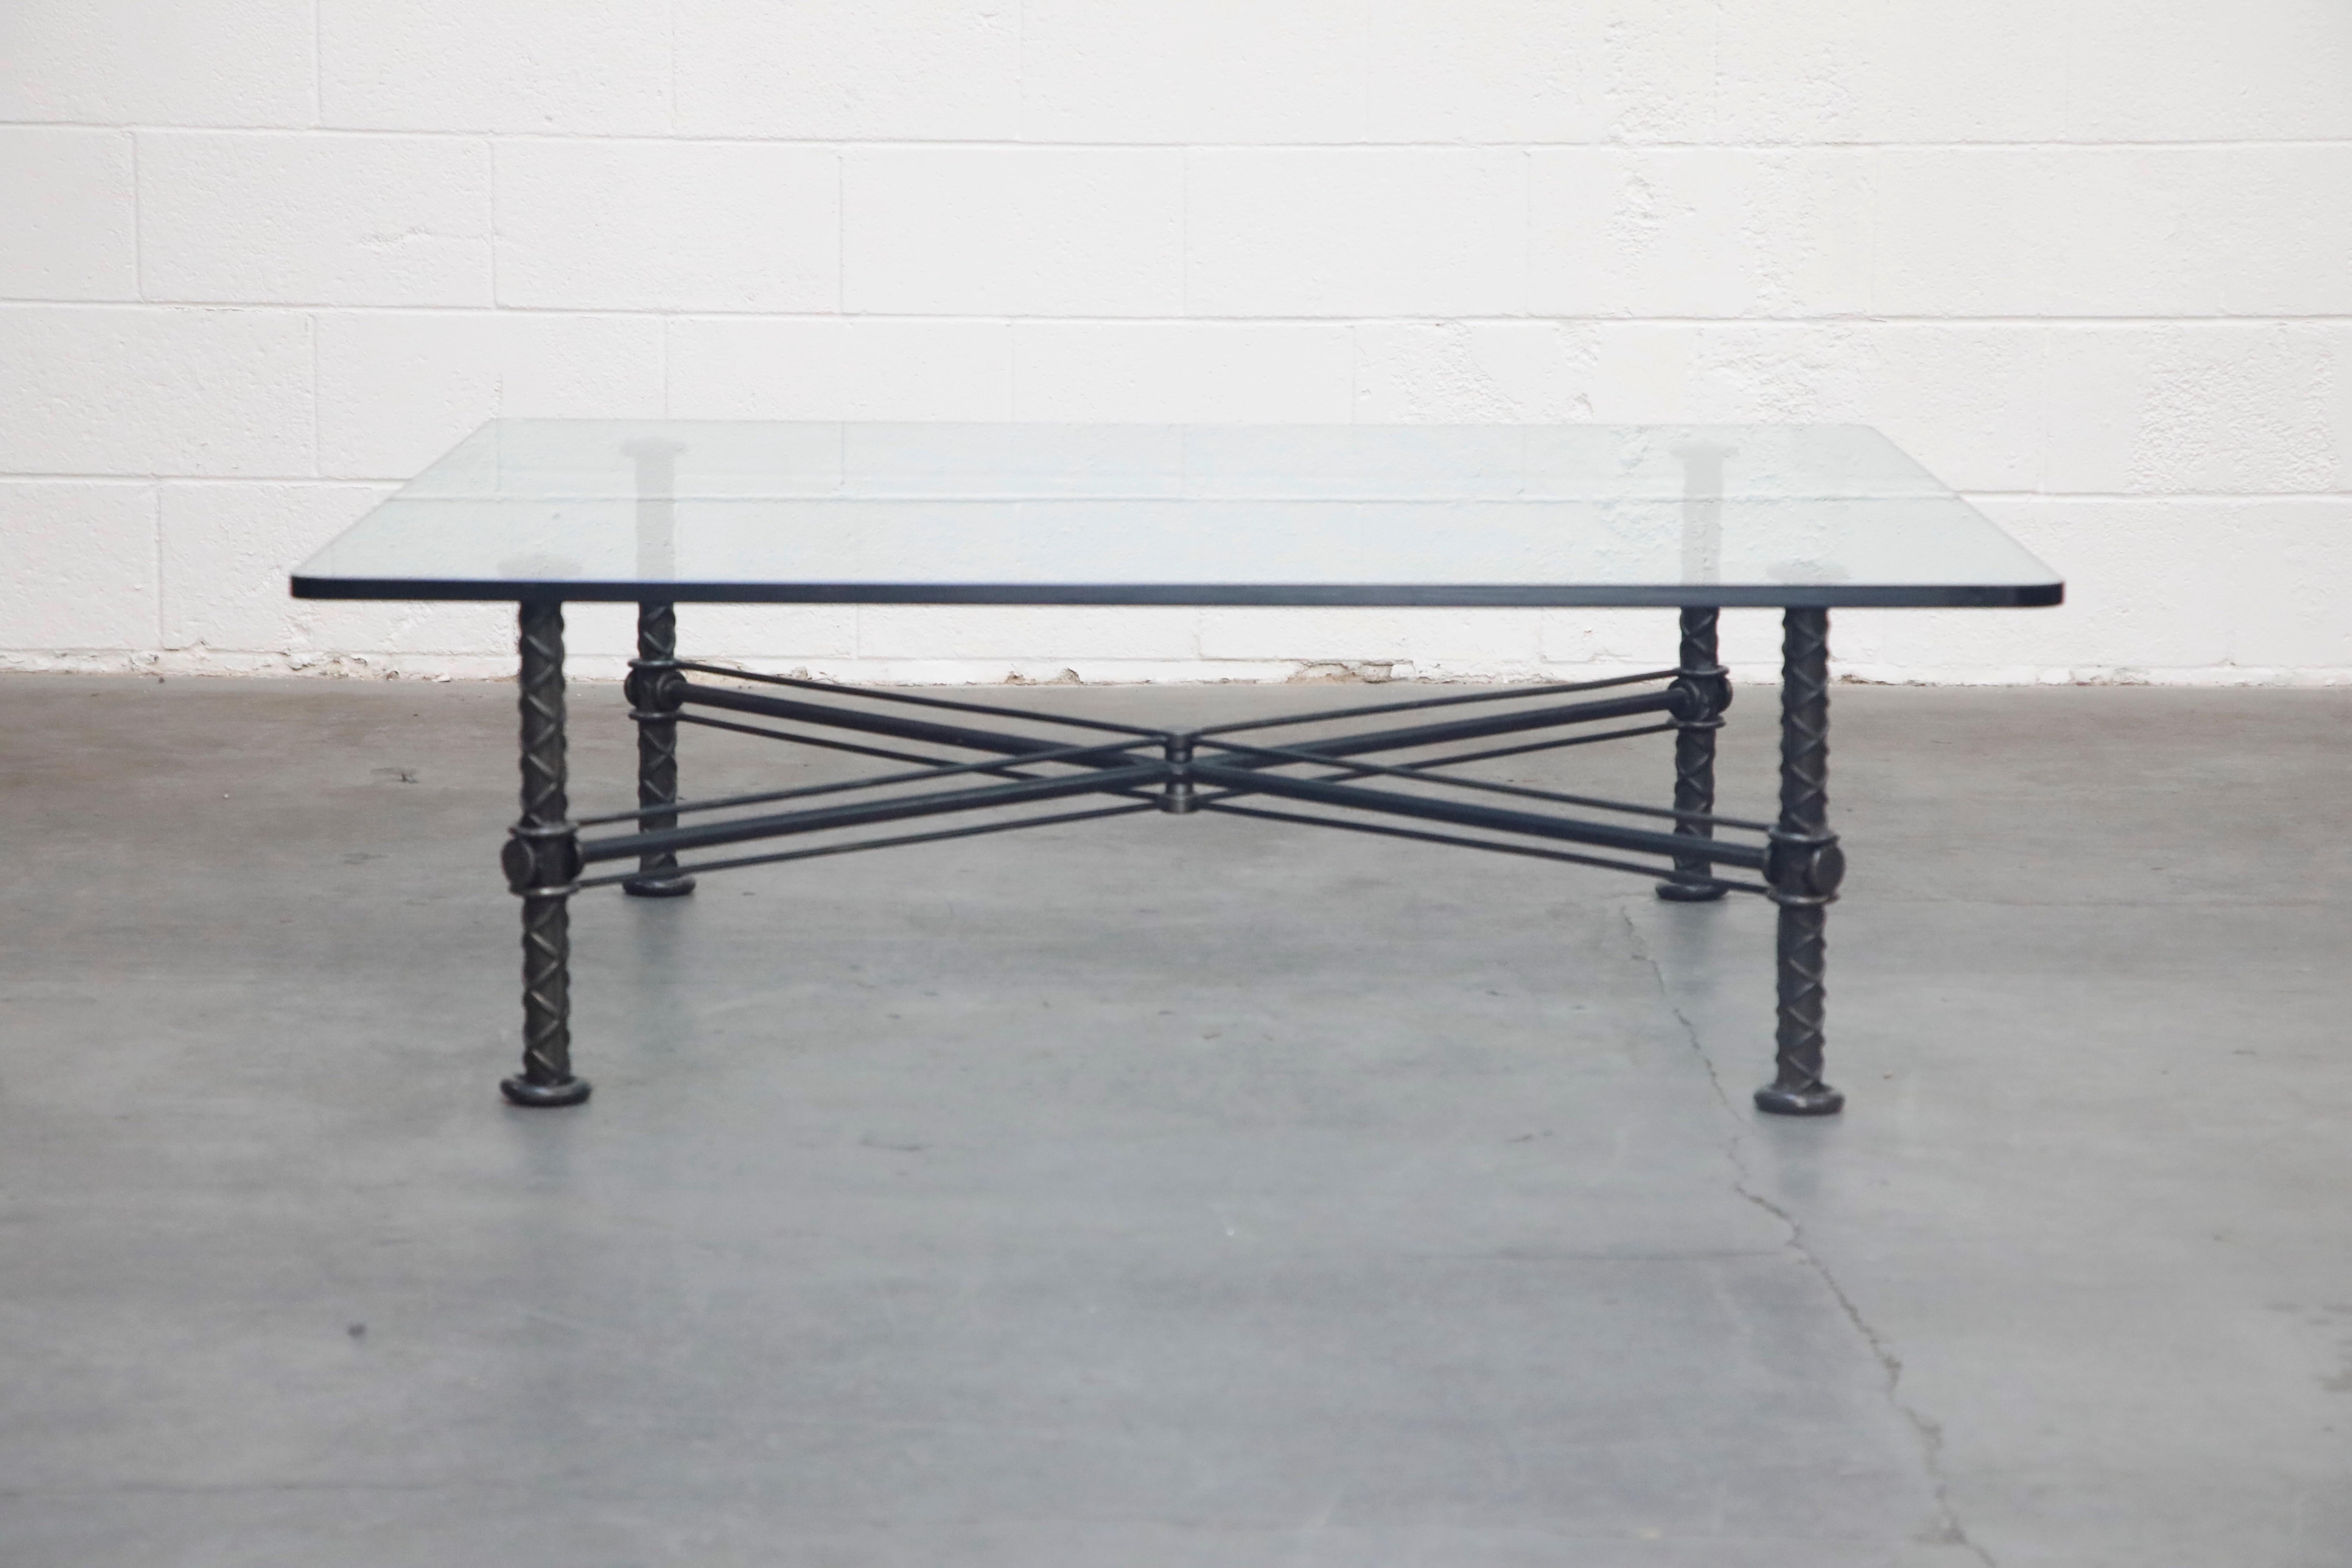 Sculpted Steel Coffee Table by Ilana Goor, Signed and Numbered Edition 1